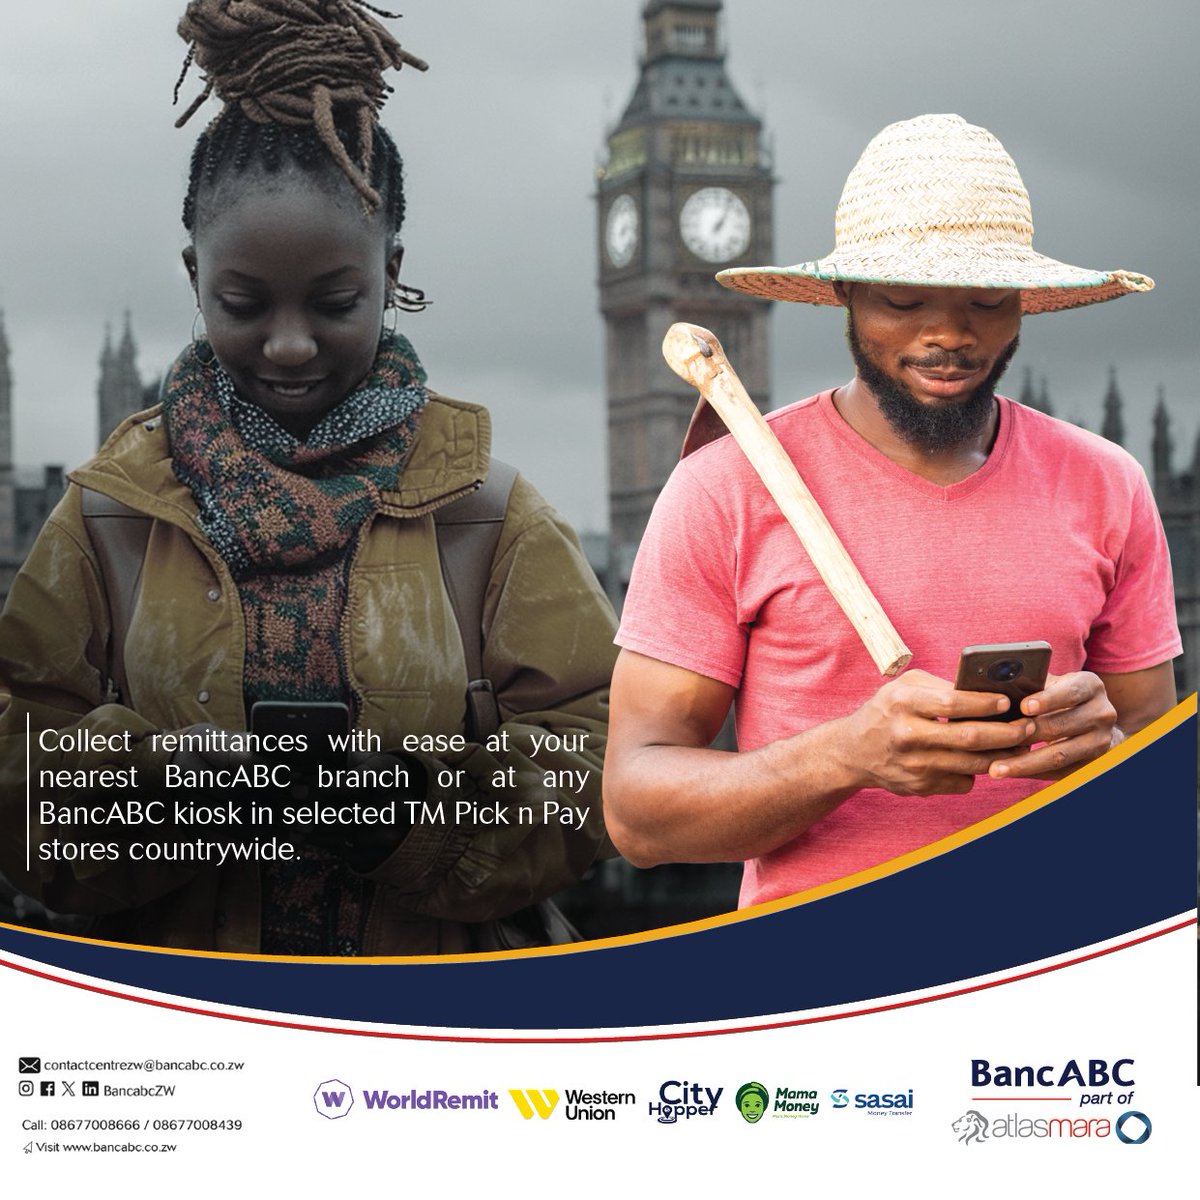 Enjoy the convenience of accessing 💸 ✅ World Remit ✅ Mukuru ✅ City Hopper ✅ Western Union ✅ Mama Money ✅ Sasai Money Transfer Available at @BancabcZW dedicated Remittance Centres in Harare & Bulawayo and at all @BancabcZW branches countrywide 🏦. #BankDifferent🏦